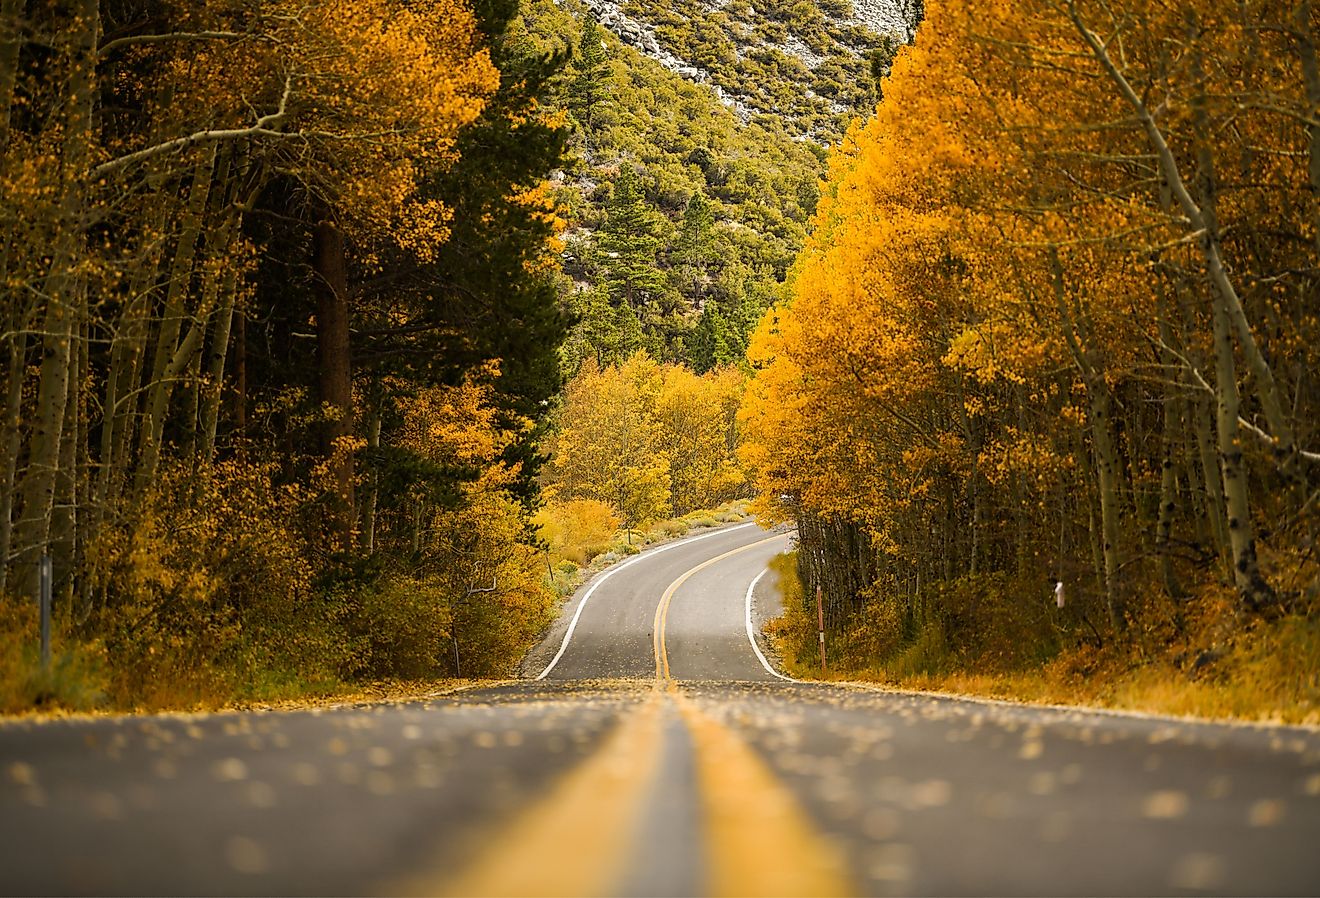 Fall road during autumn at June Lake, California with yellow aspen trees, view of road, falling leaves.